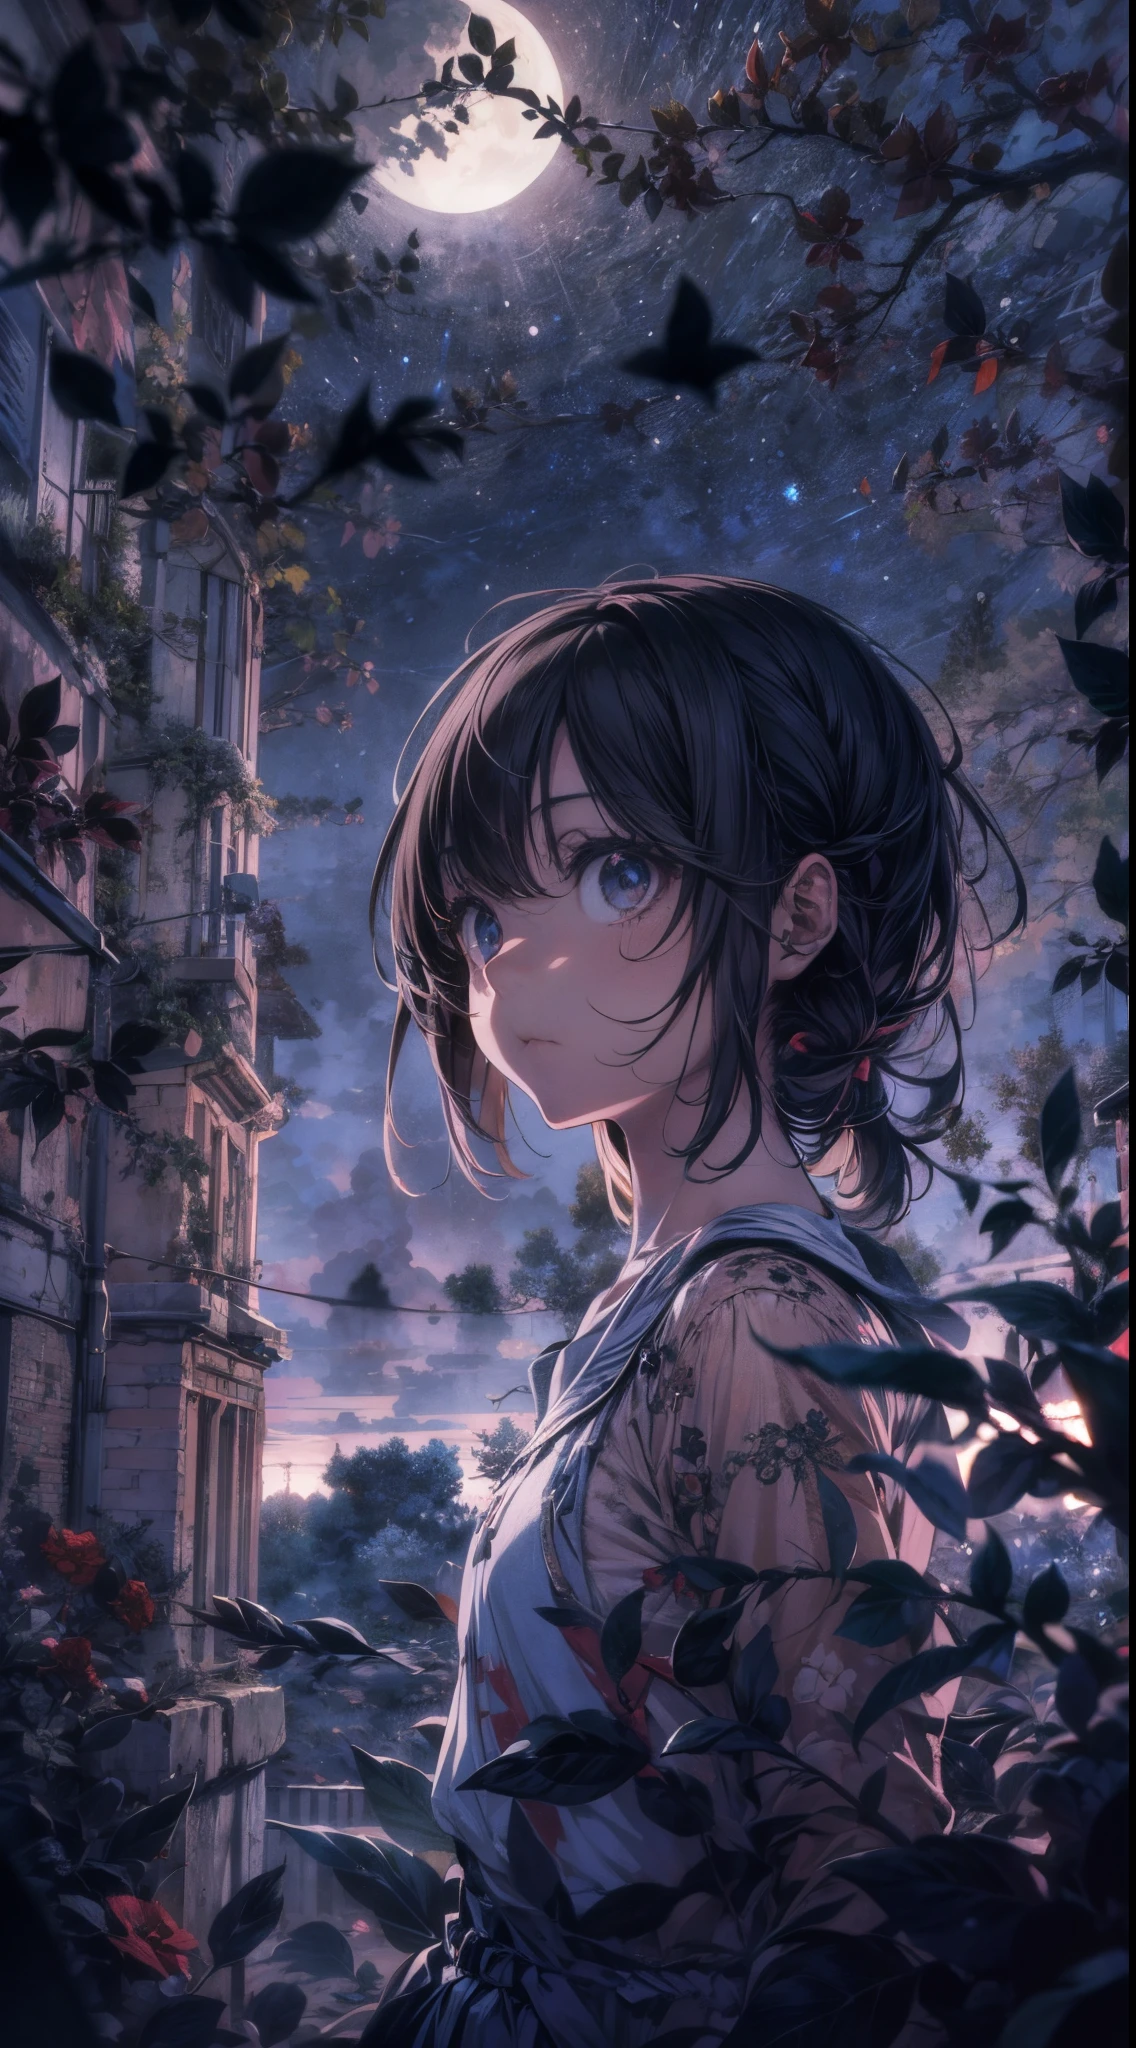 Create an image in the style of Kyle Thompson, featuring an anime-style girl character. She stands in an abandoned park filled with black roses, symbolizing death. The scene is illuminated by moonlight, which adds depth to the image. Use shallow focus to emphasize the girl and the immediate surroundings, while the background softly blurs. In the foreground, include the shadow of a cross, adding a dramatic and symbolic element to the scene. The contrast between the photorealistic Kyle Thompson style setting and the anime-style character should be striking, effectively synthesizing the differences in artistic mediums.